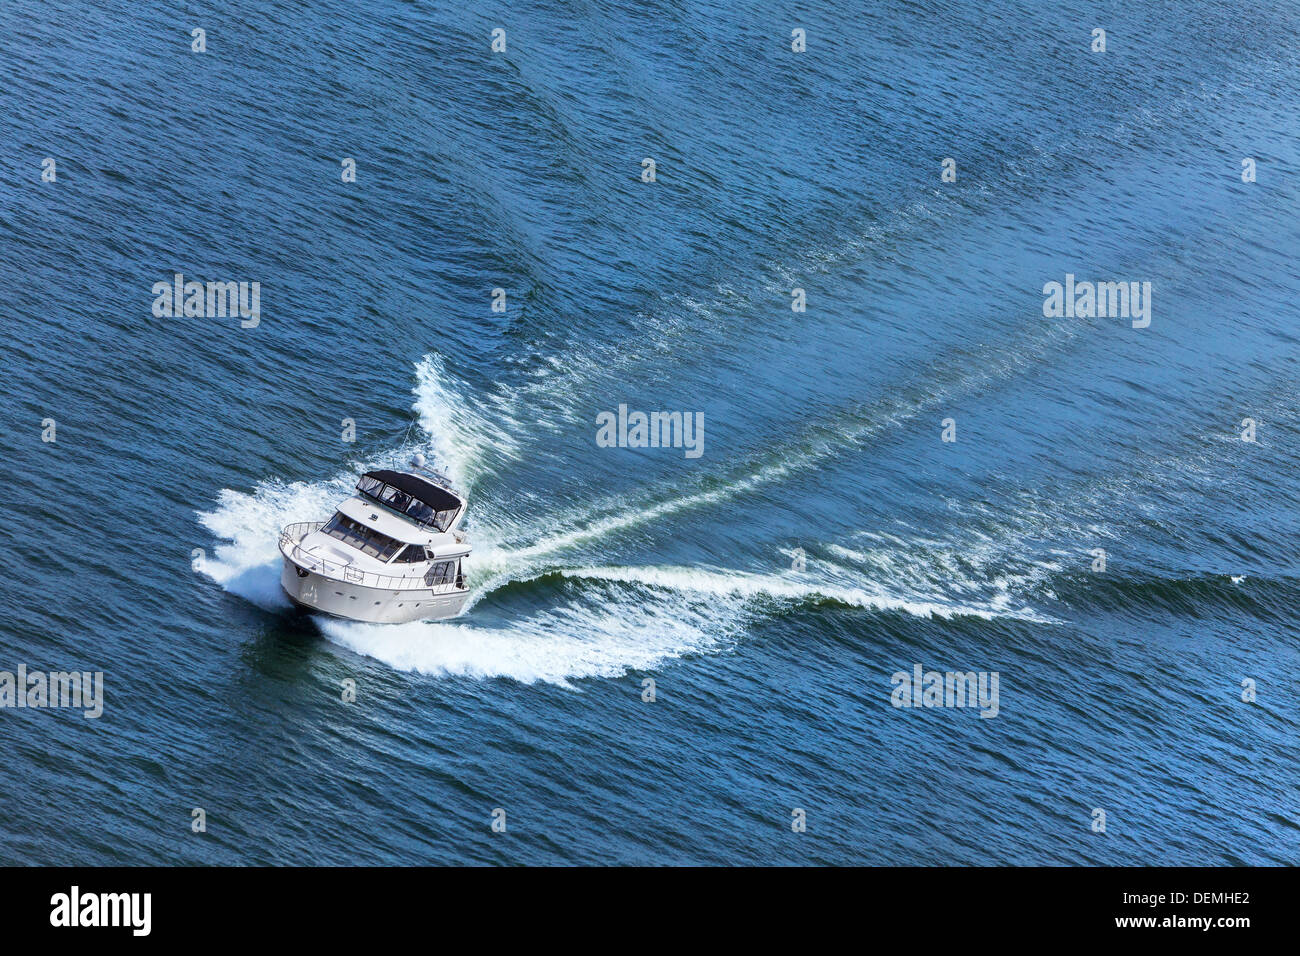 Aerial photograph of luxury power boat yacht speedboat on blue sea Stock Photo